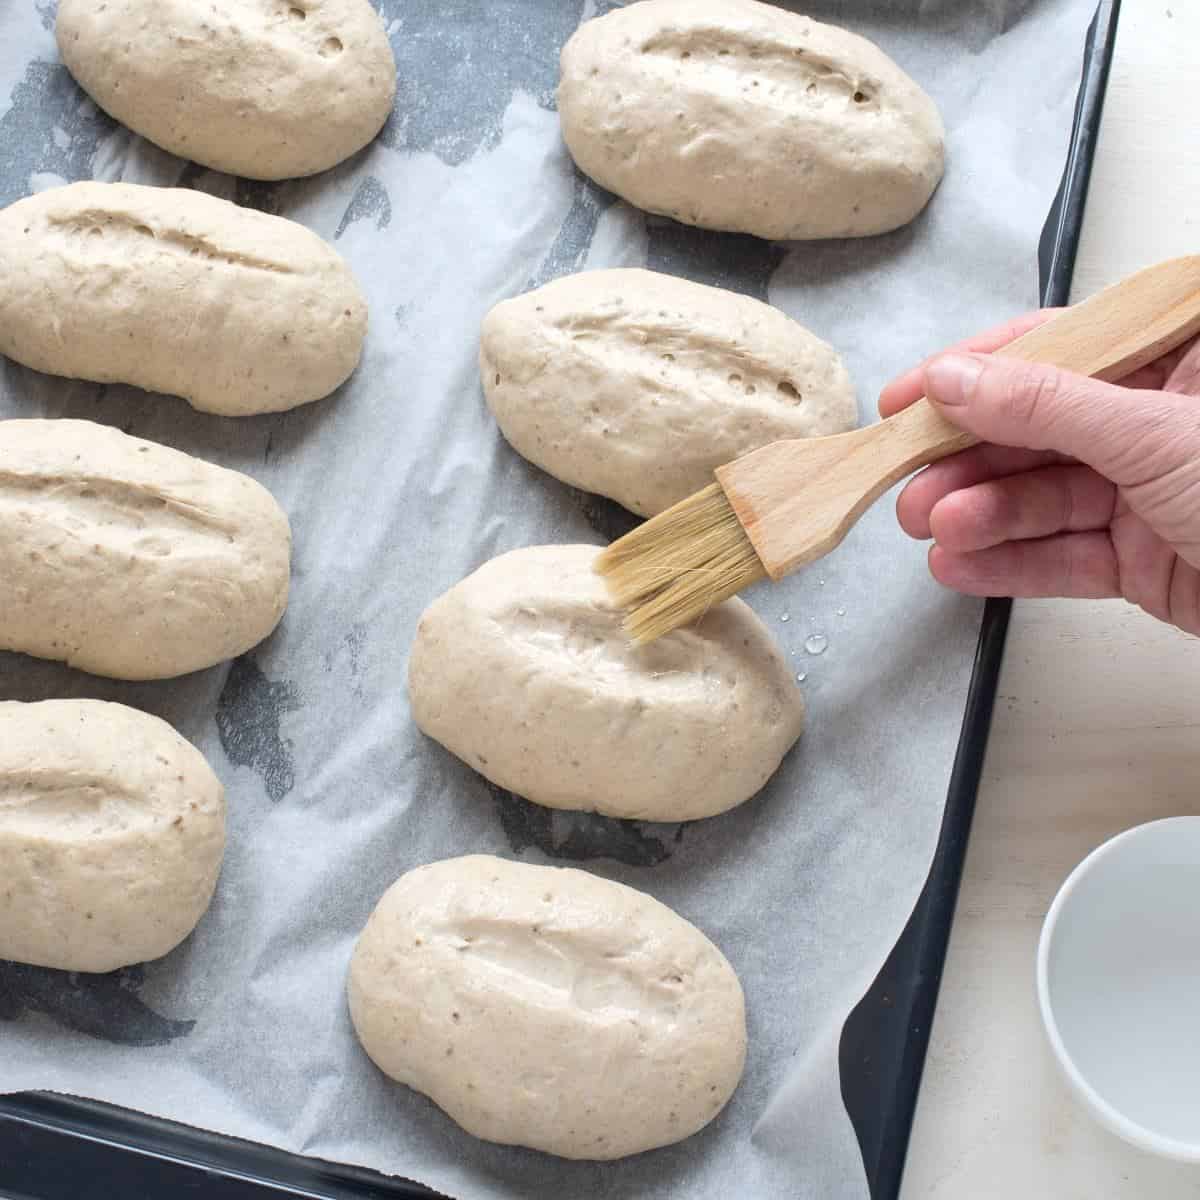 Brushing rye rolls placed on a baking sheet with water.